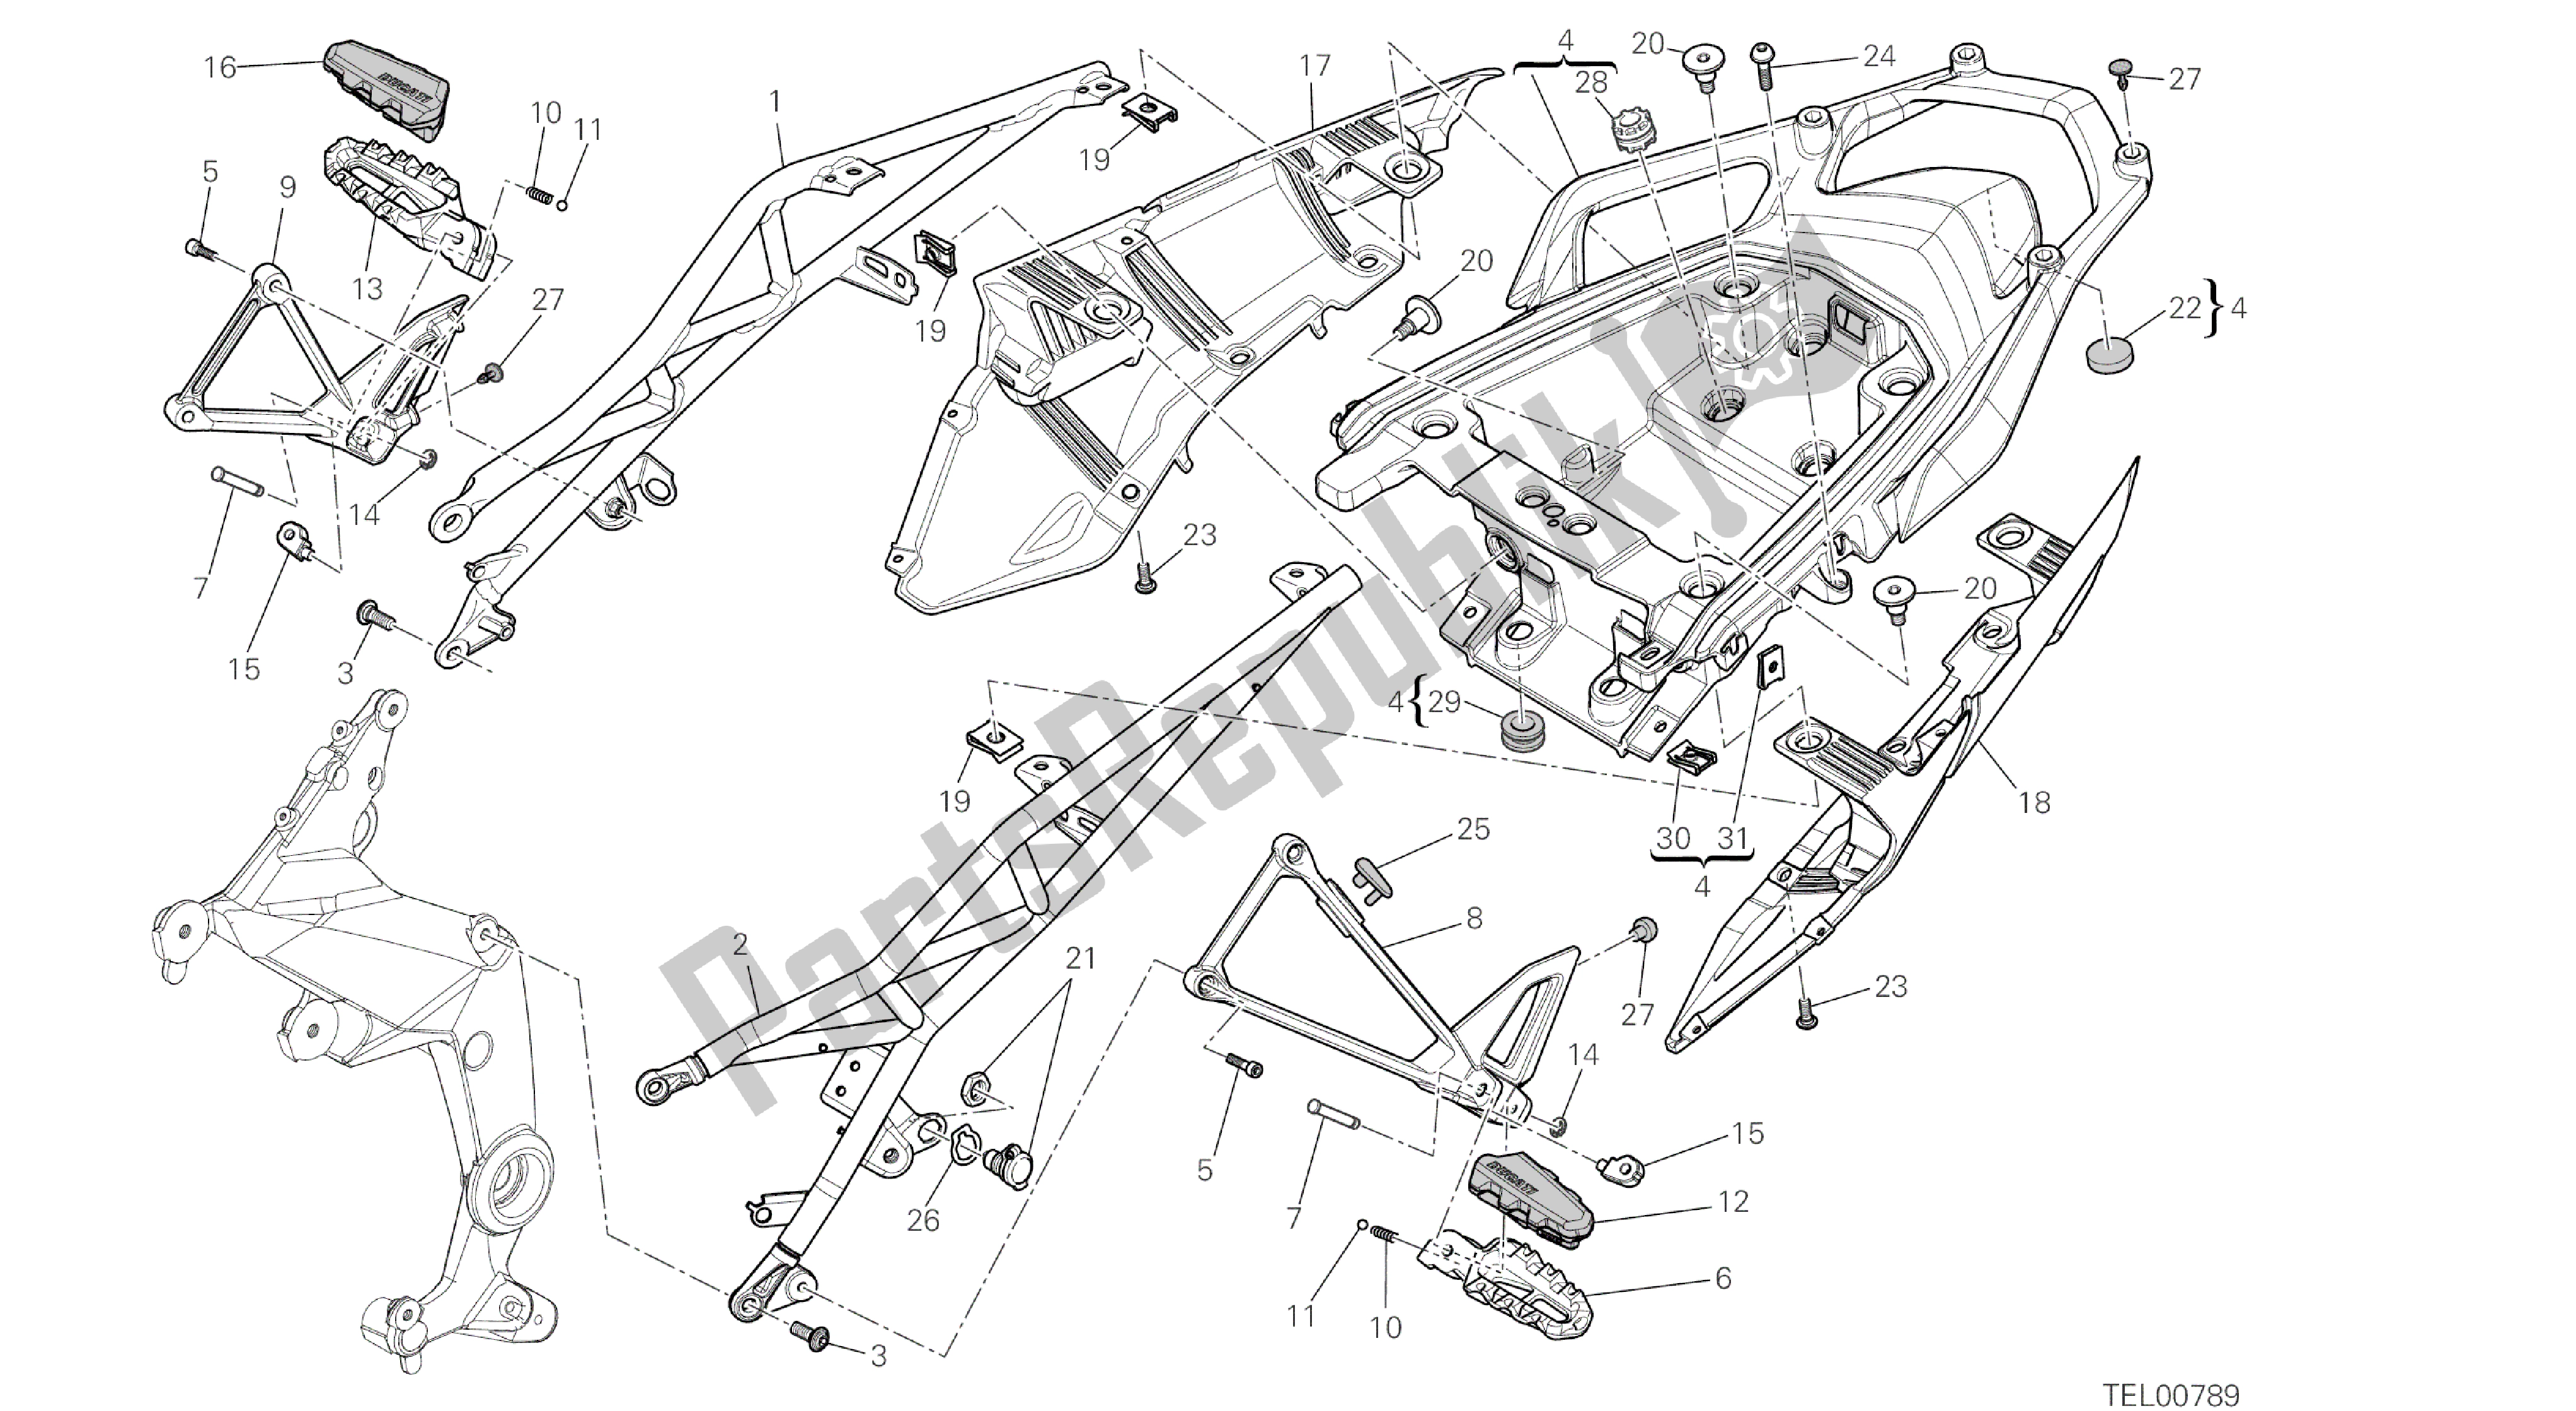 All parts for the Drawing 027 - Rear Frame Comp. [mod:ms1200pp;xst:aus,eur,fra,jap,tha]group Frame of the Ducati Multistrada S Pikes Peak 1200 2014